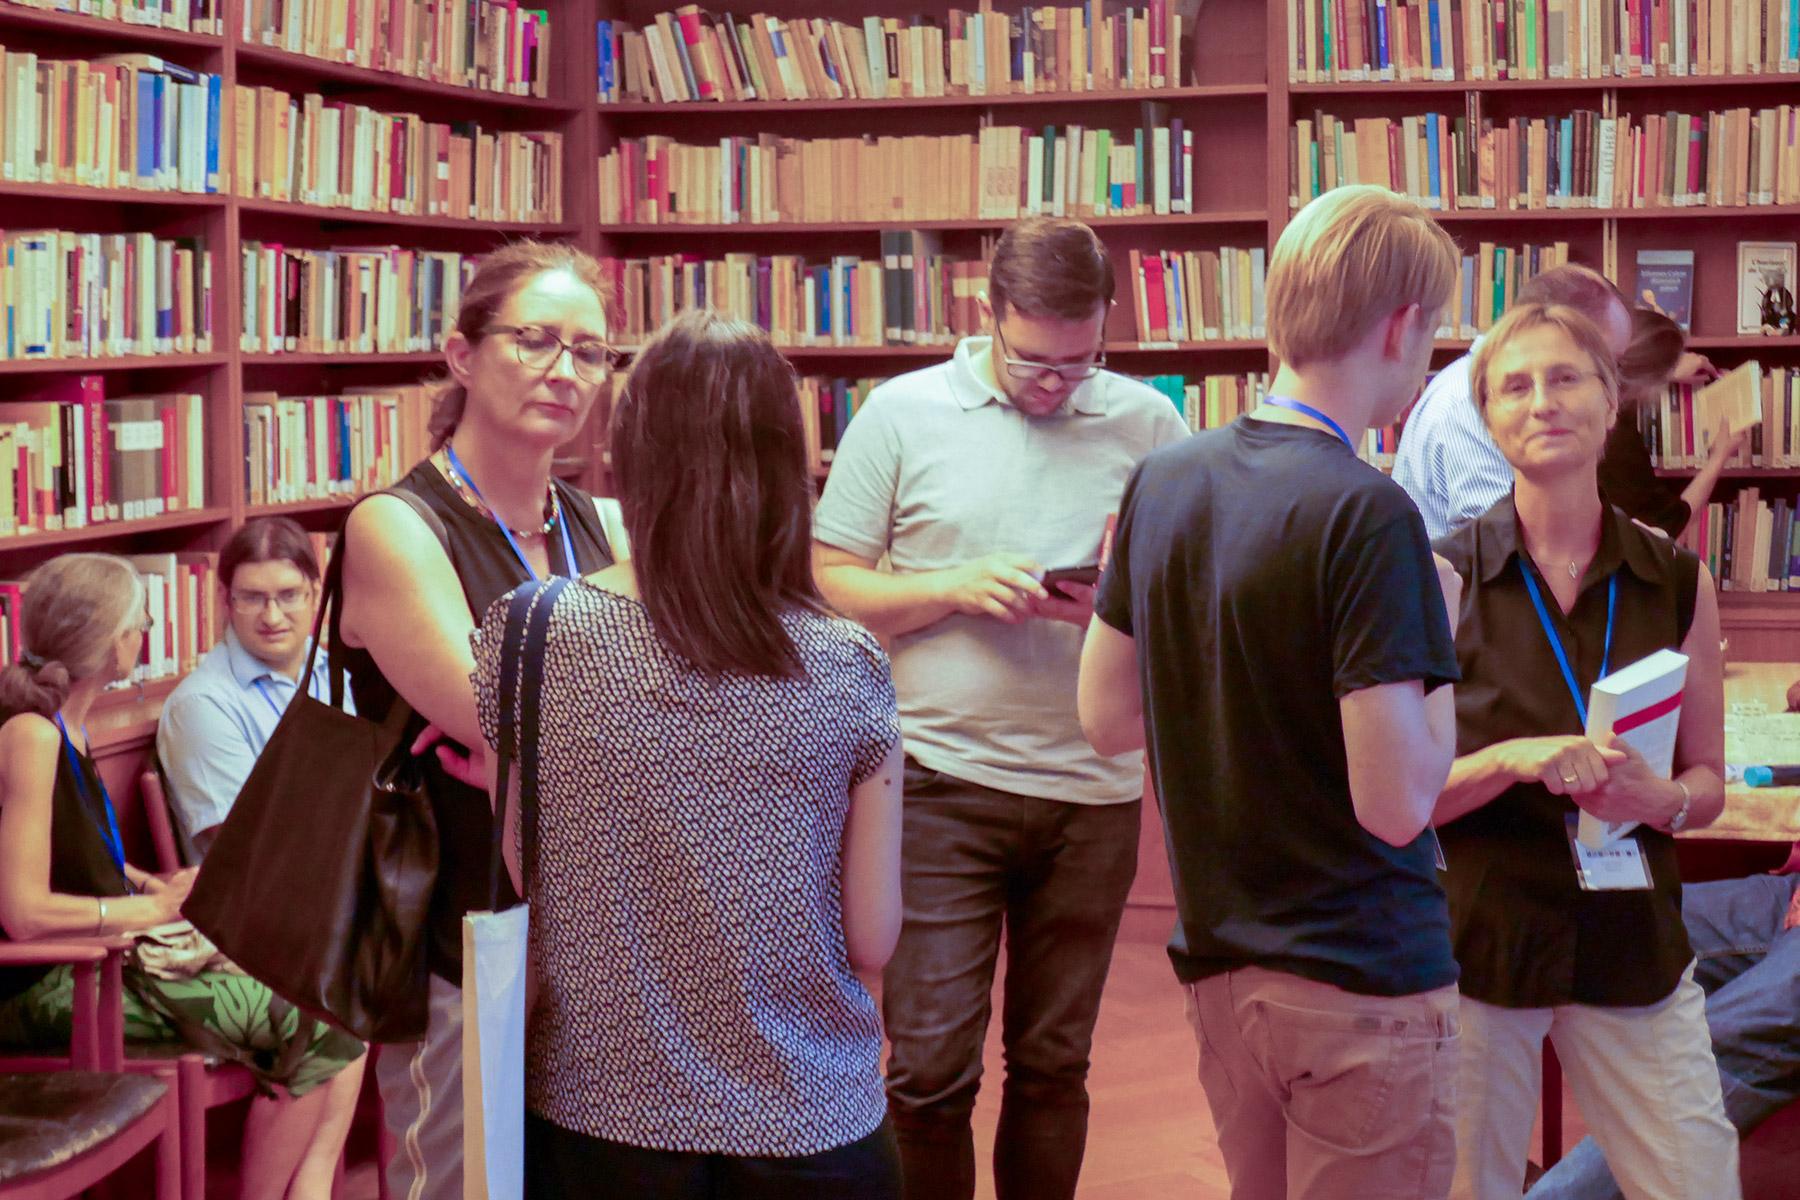 A group of students at the Institute for Ecumenical Research in Strasbourg. Photo: Institute for Ecumenical Research in Strasbourg